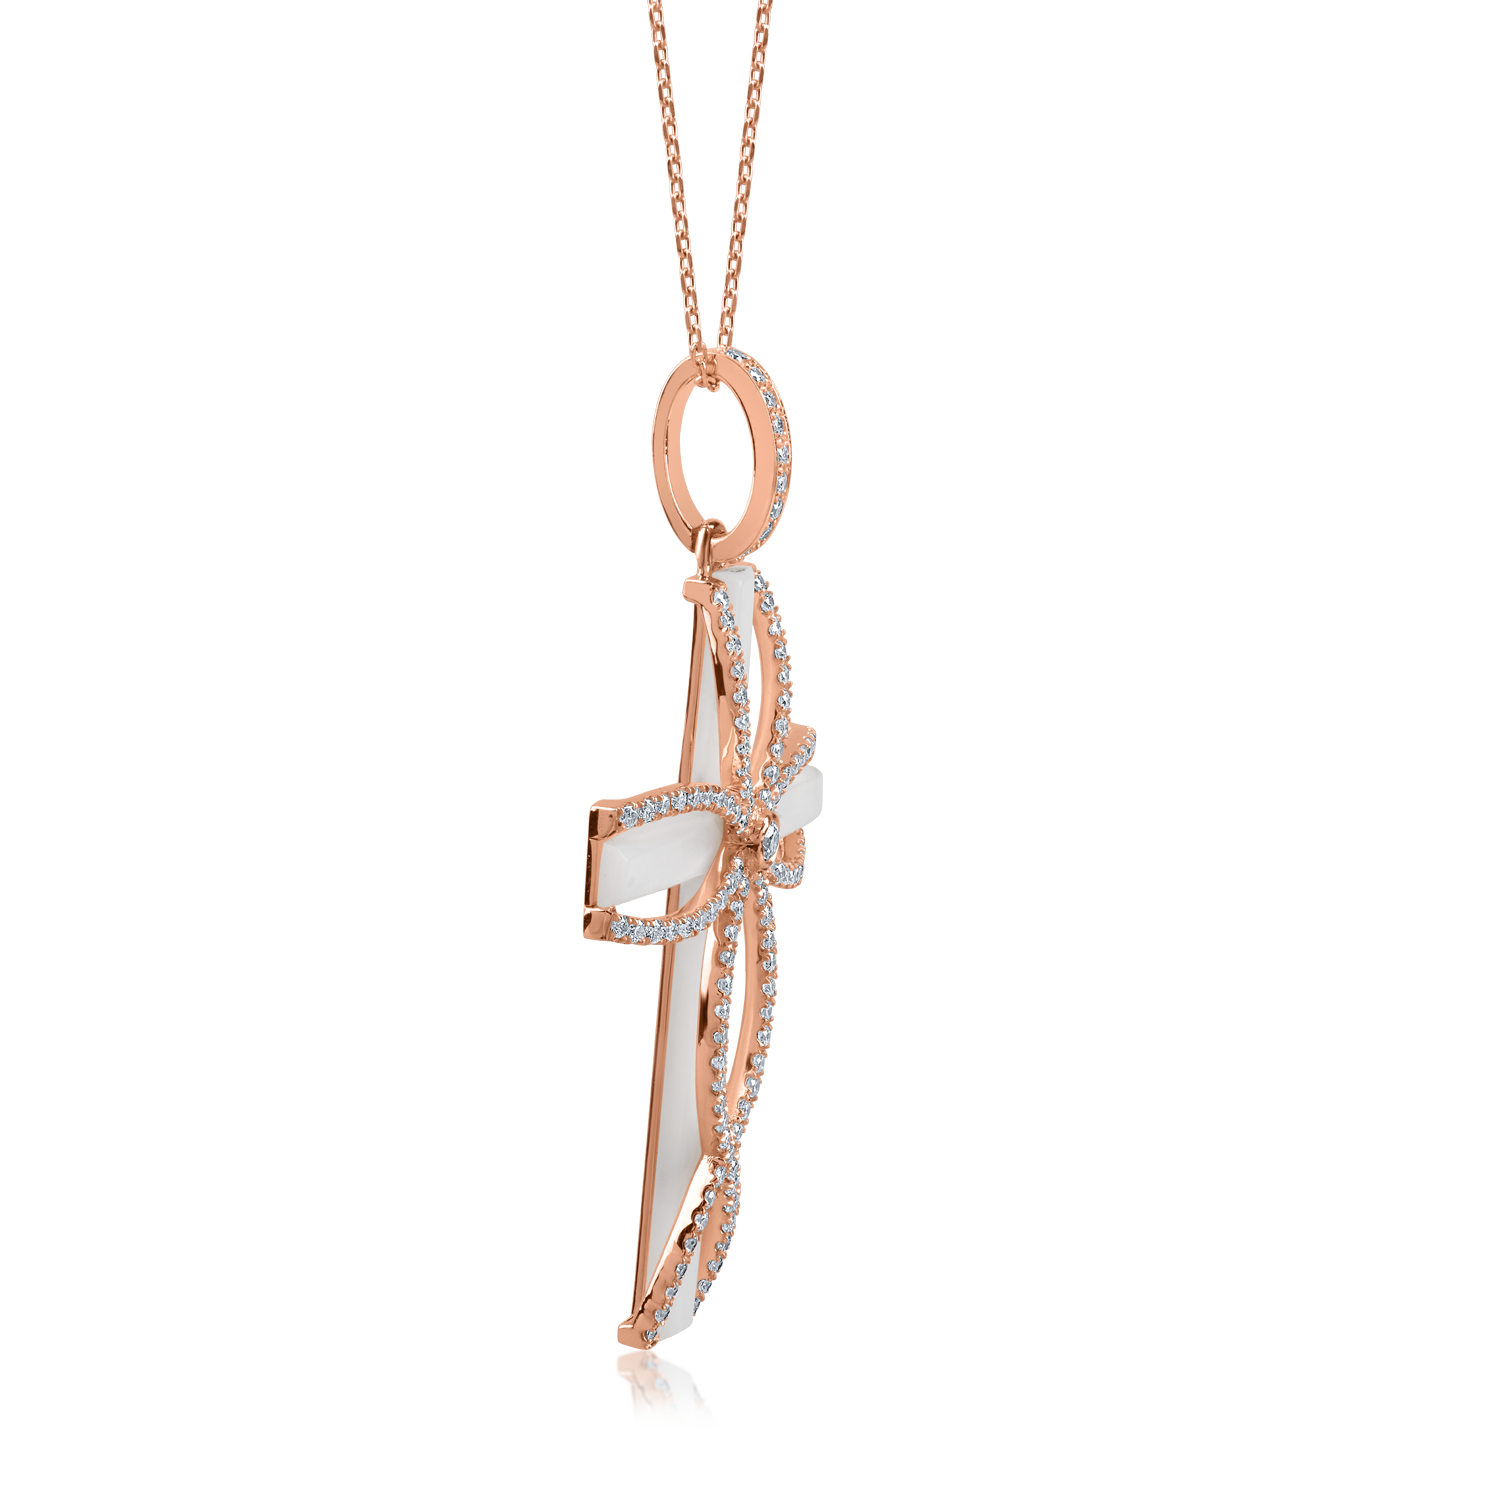 Rose gold cross pendant necklace with 4.2ct mother of pearl and 0.58ct diamonds